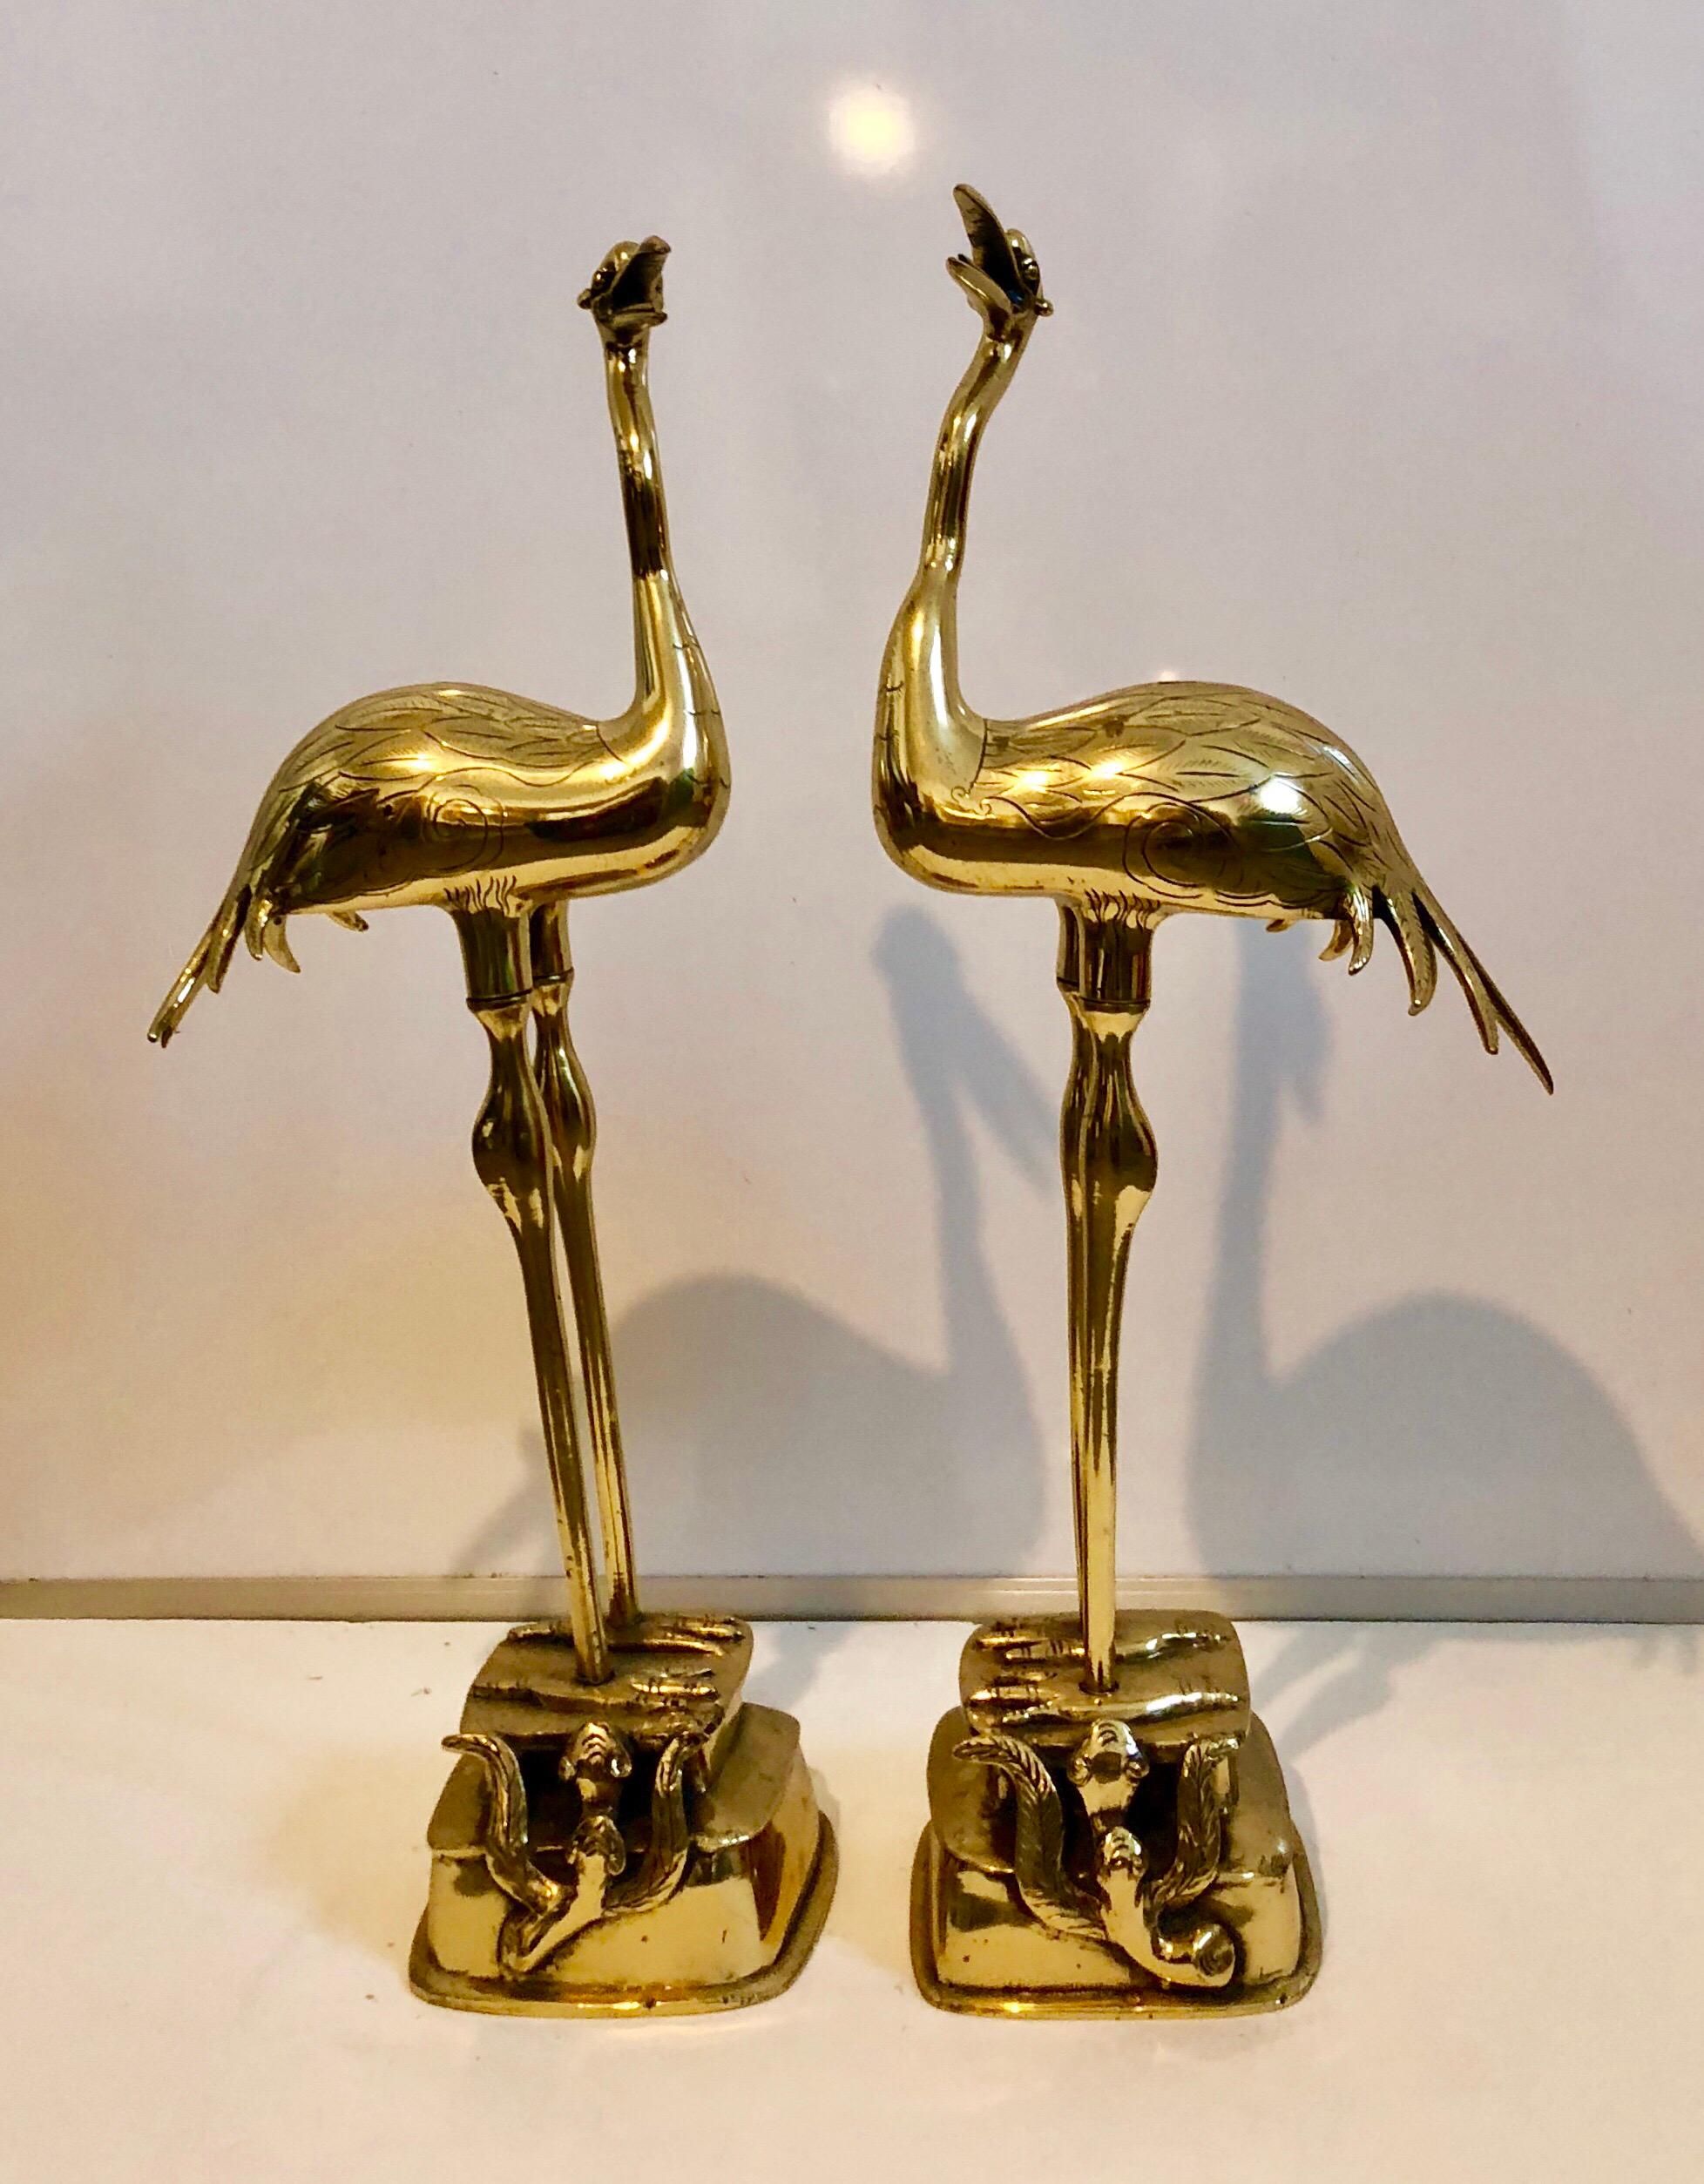 Pair of 19th century decorative polished bronze (or brass) Japanese (or Chinese, these are definitely Asian) sculptural cranes (or flamingos) resting on a rock with snakes. Animalia candle holders. missing the pricket piece that holds the candle. 